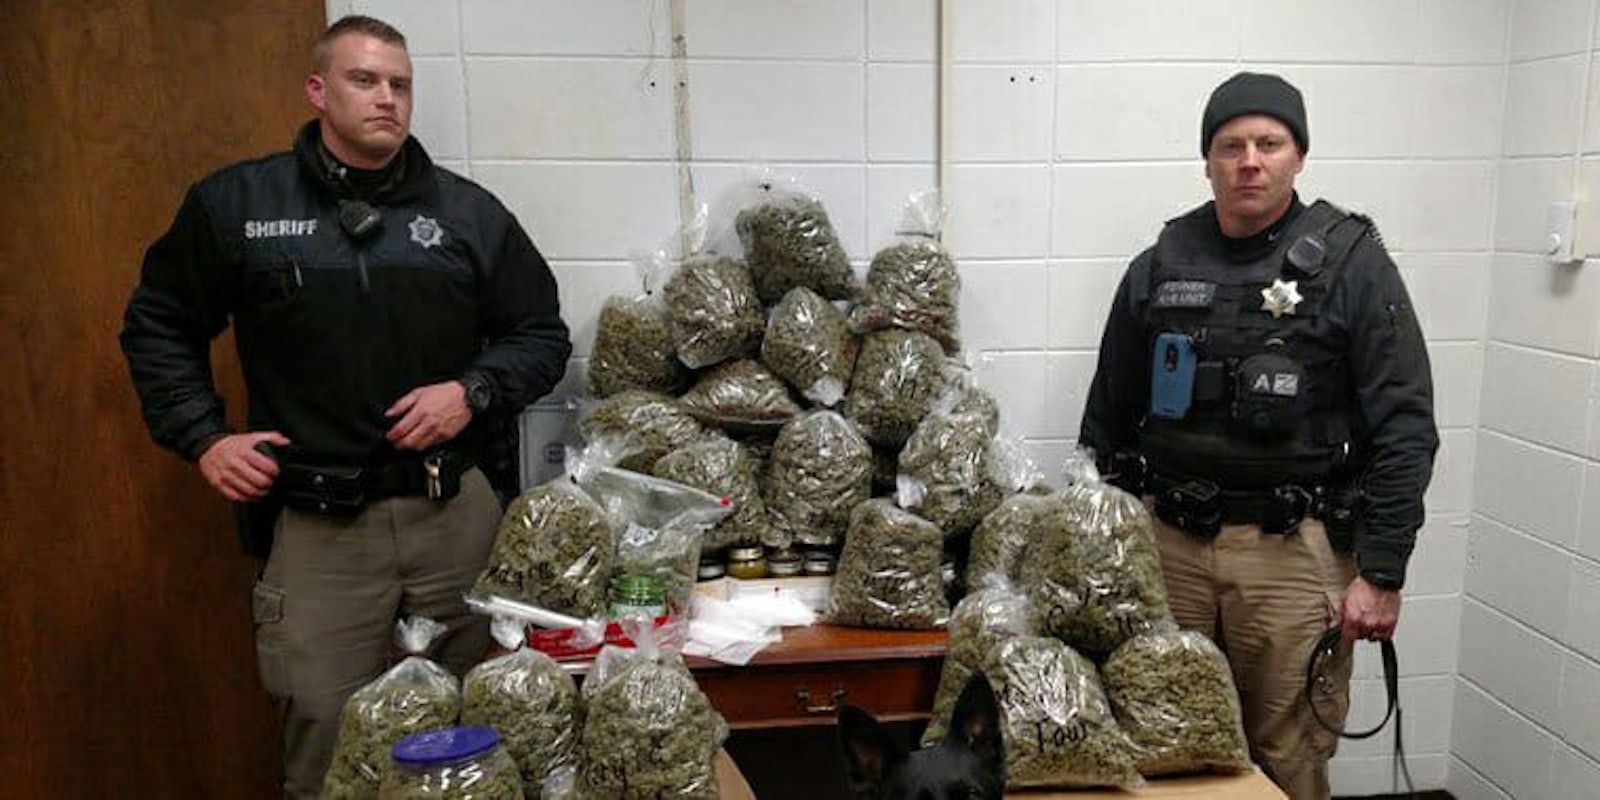 An elderly couple was pulled over in Nebraska and found to have 60 pounds of pot in their trunk.